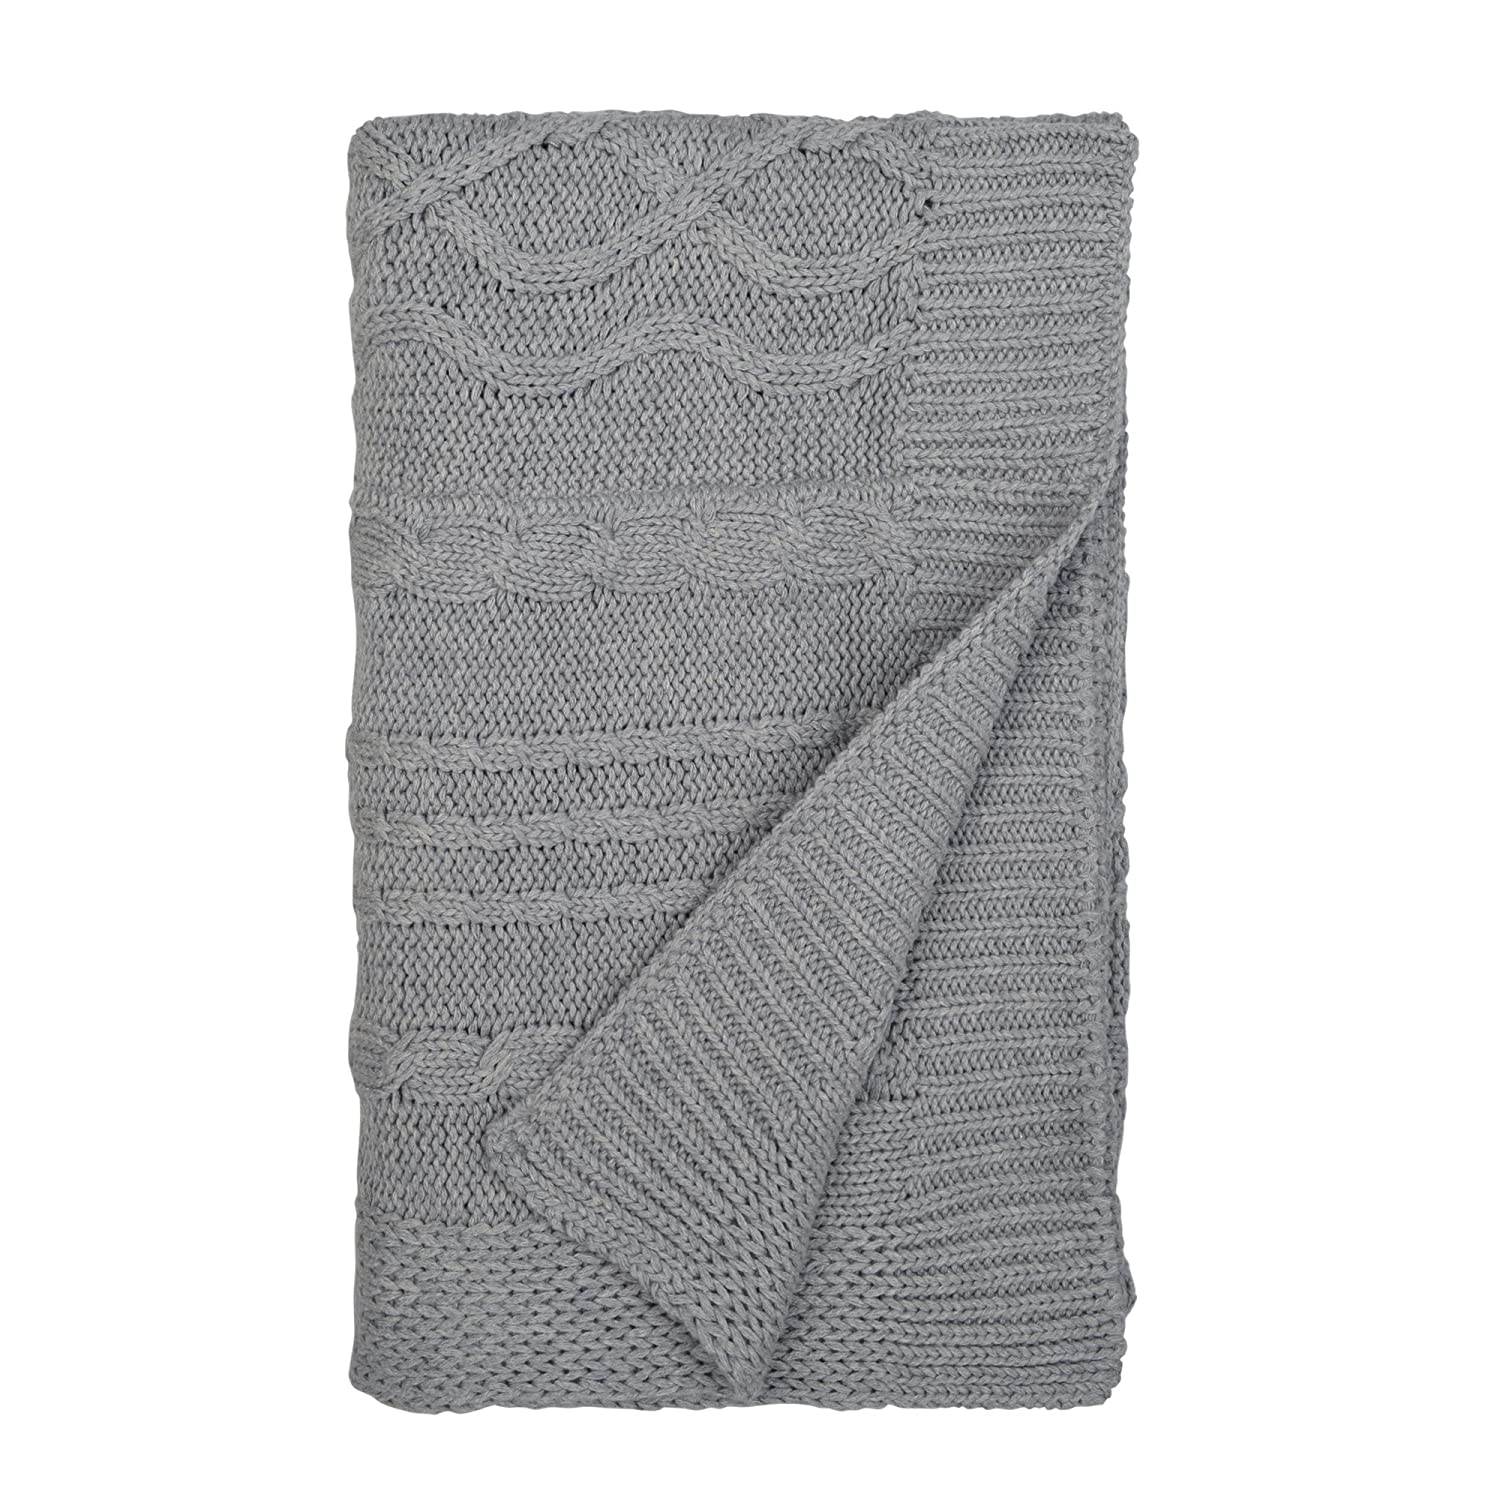 Organic Cotton Baby Blanket for Ultimate Comfort